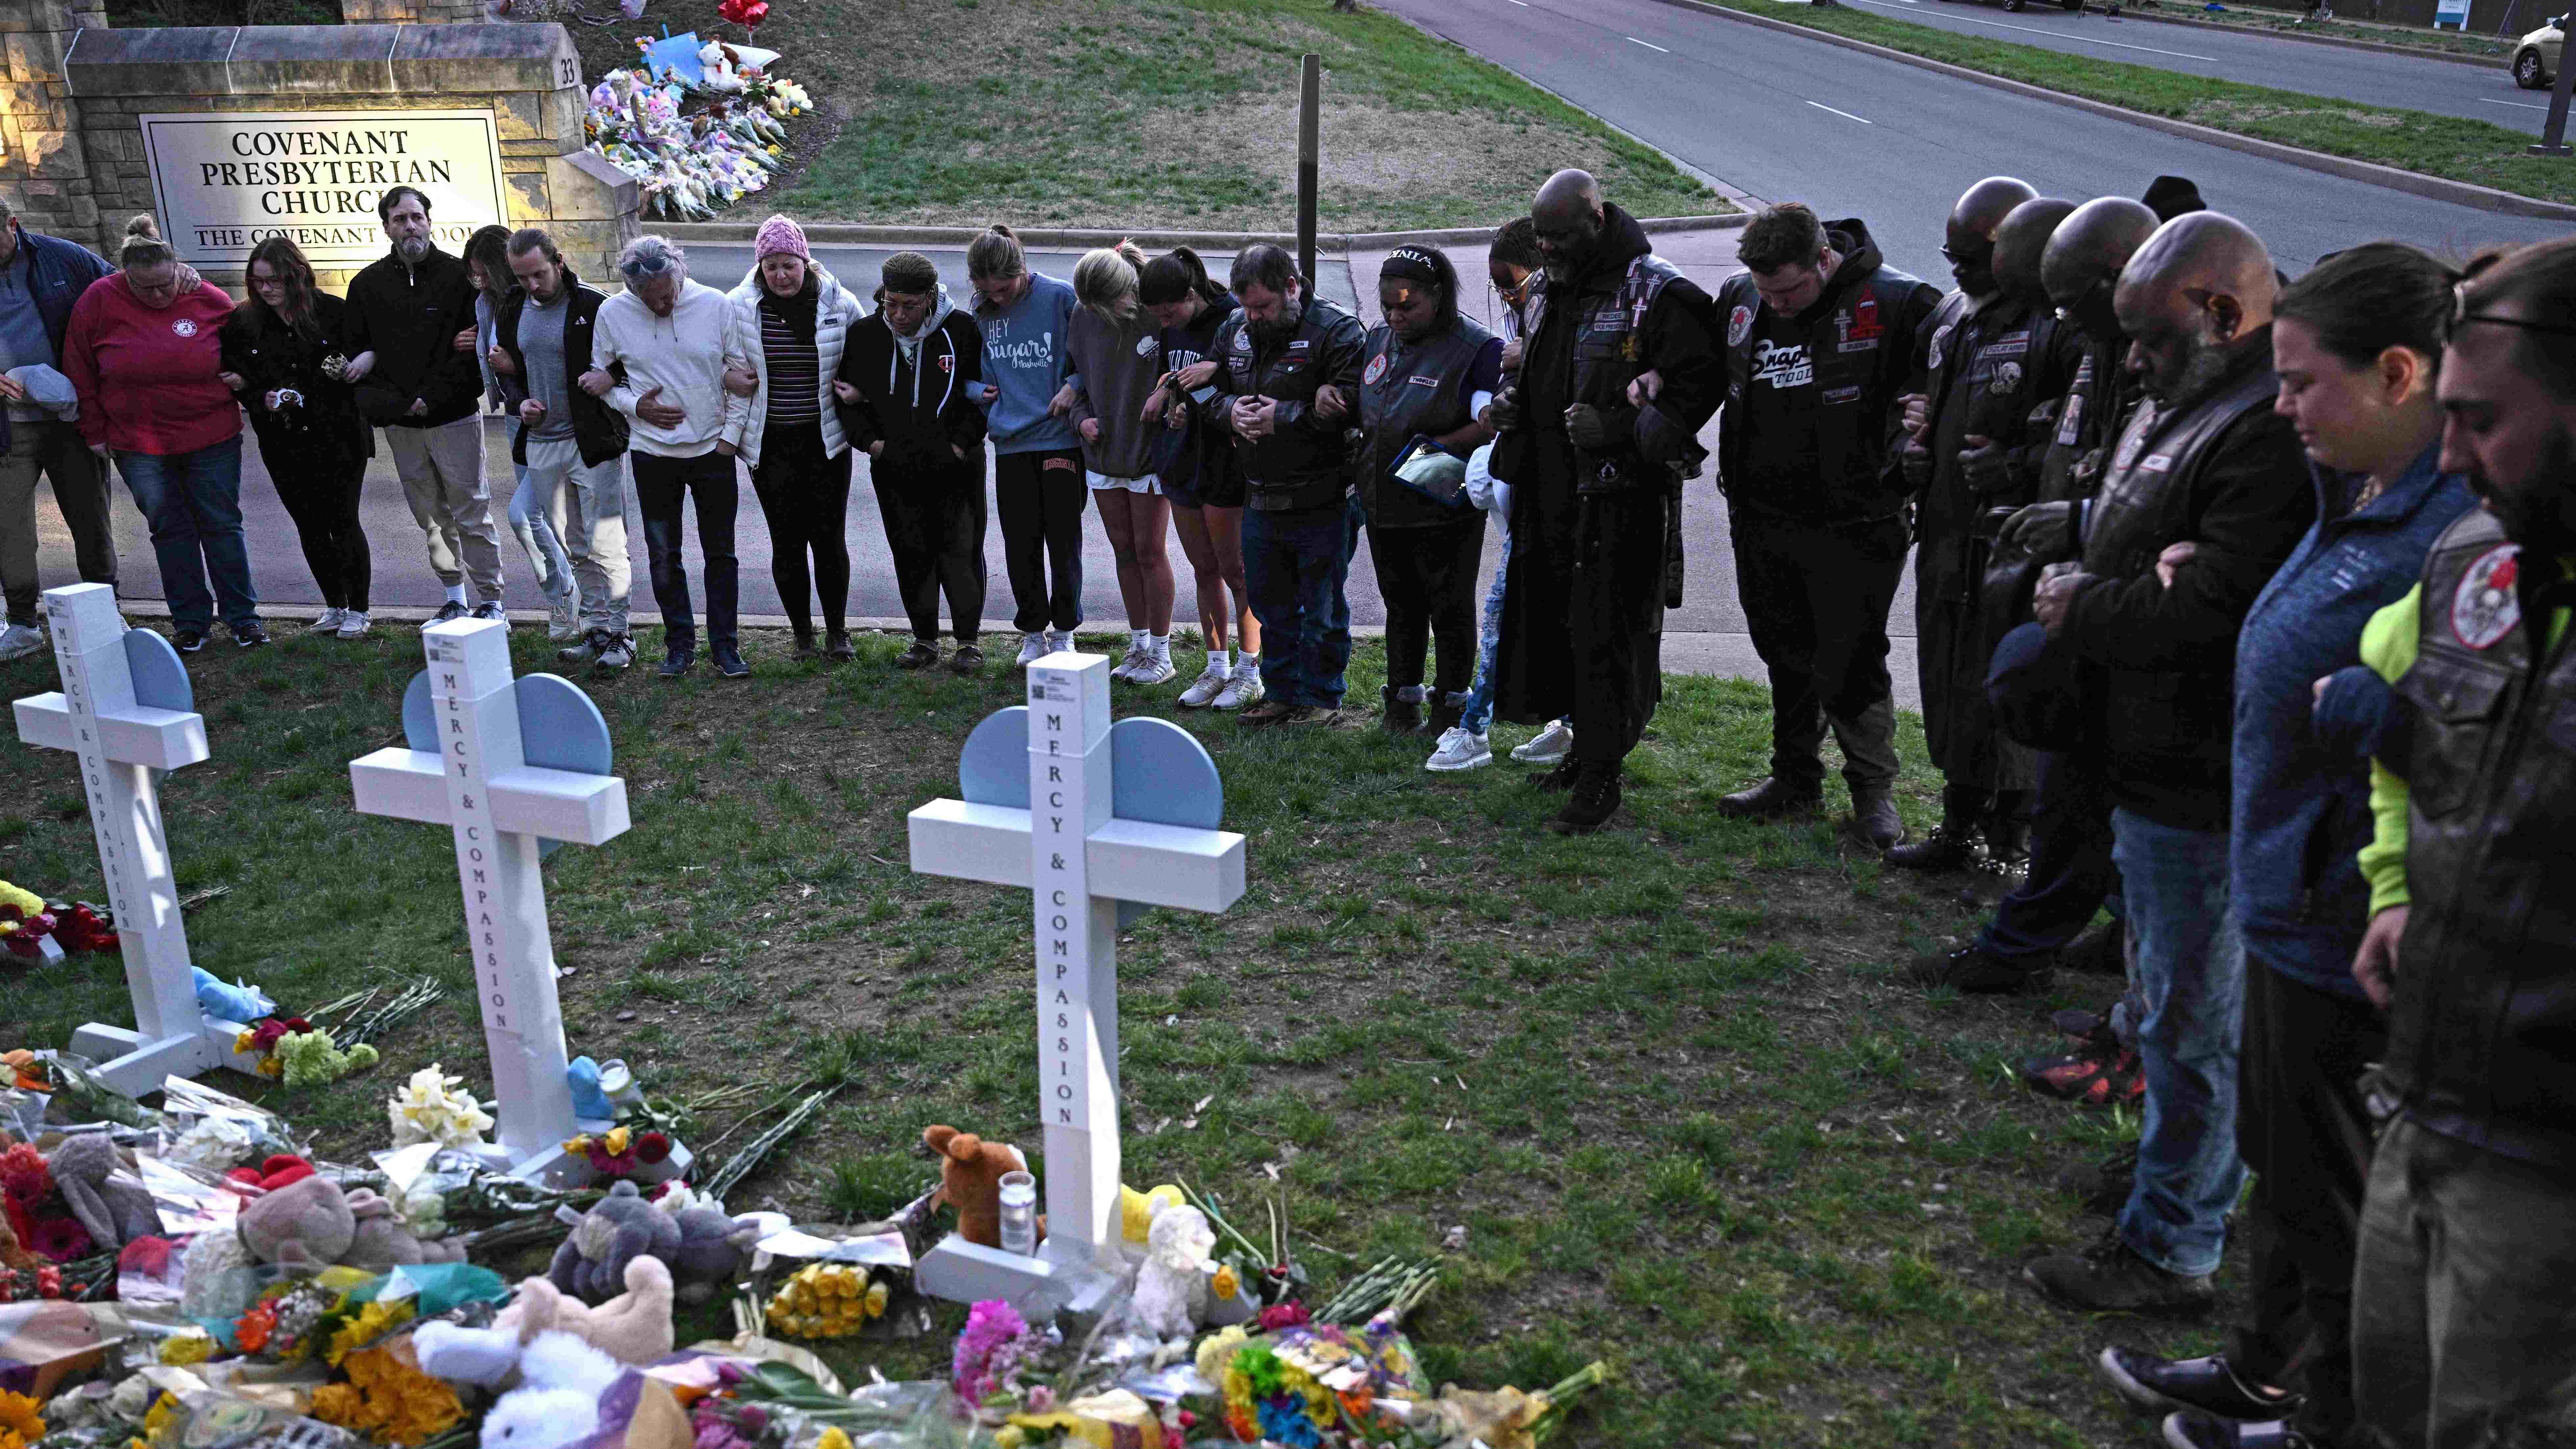 Members of the Selected First Motorcycle Club join others in prayer at a makeshift memorial for victims of a shooting at the Covenant School campus, in Nashville, Tennessee, March 28. Credit: AFP Photo